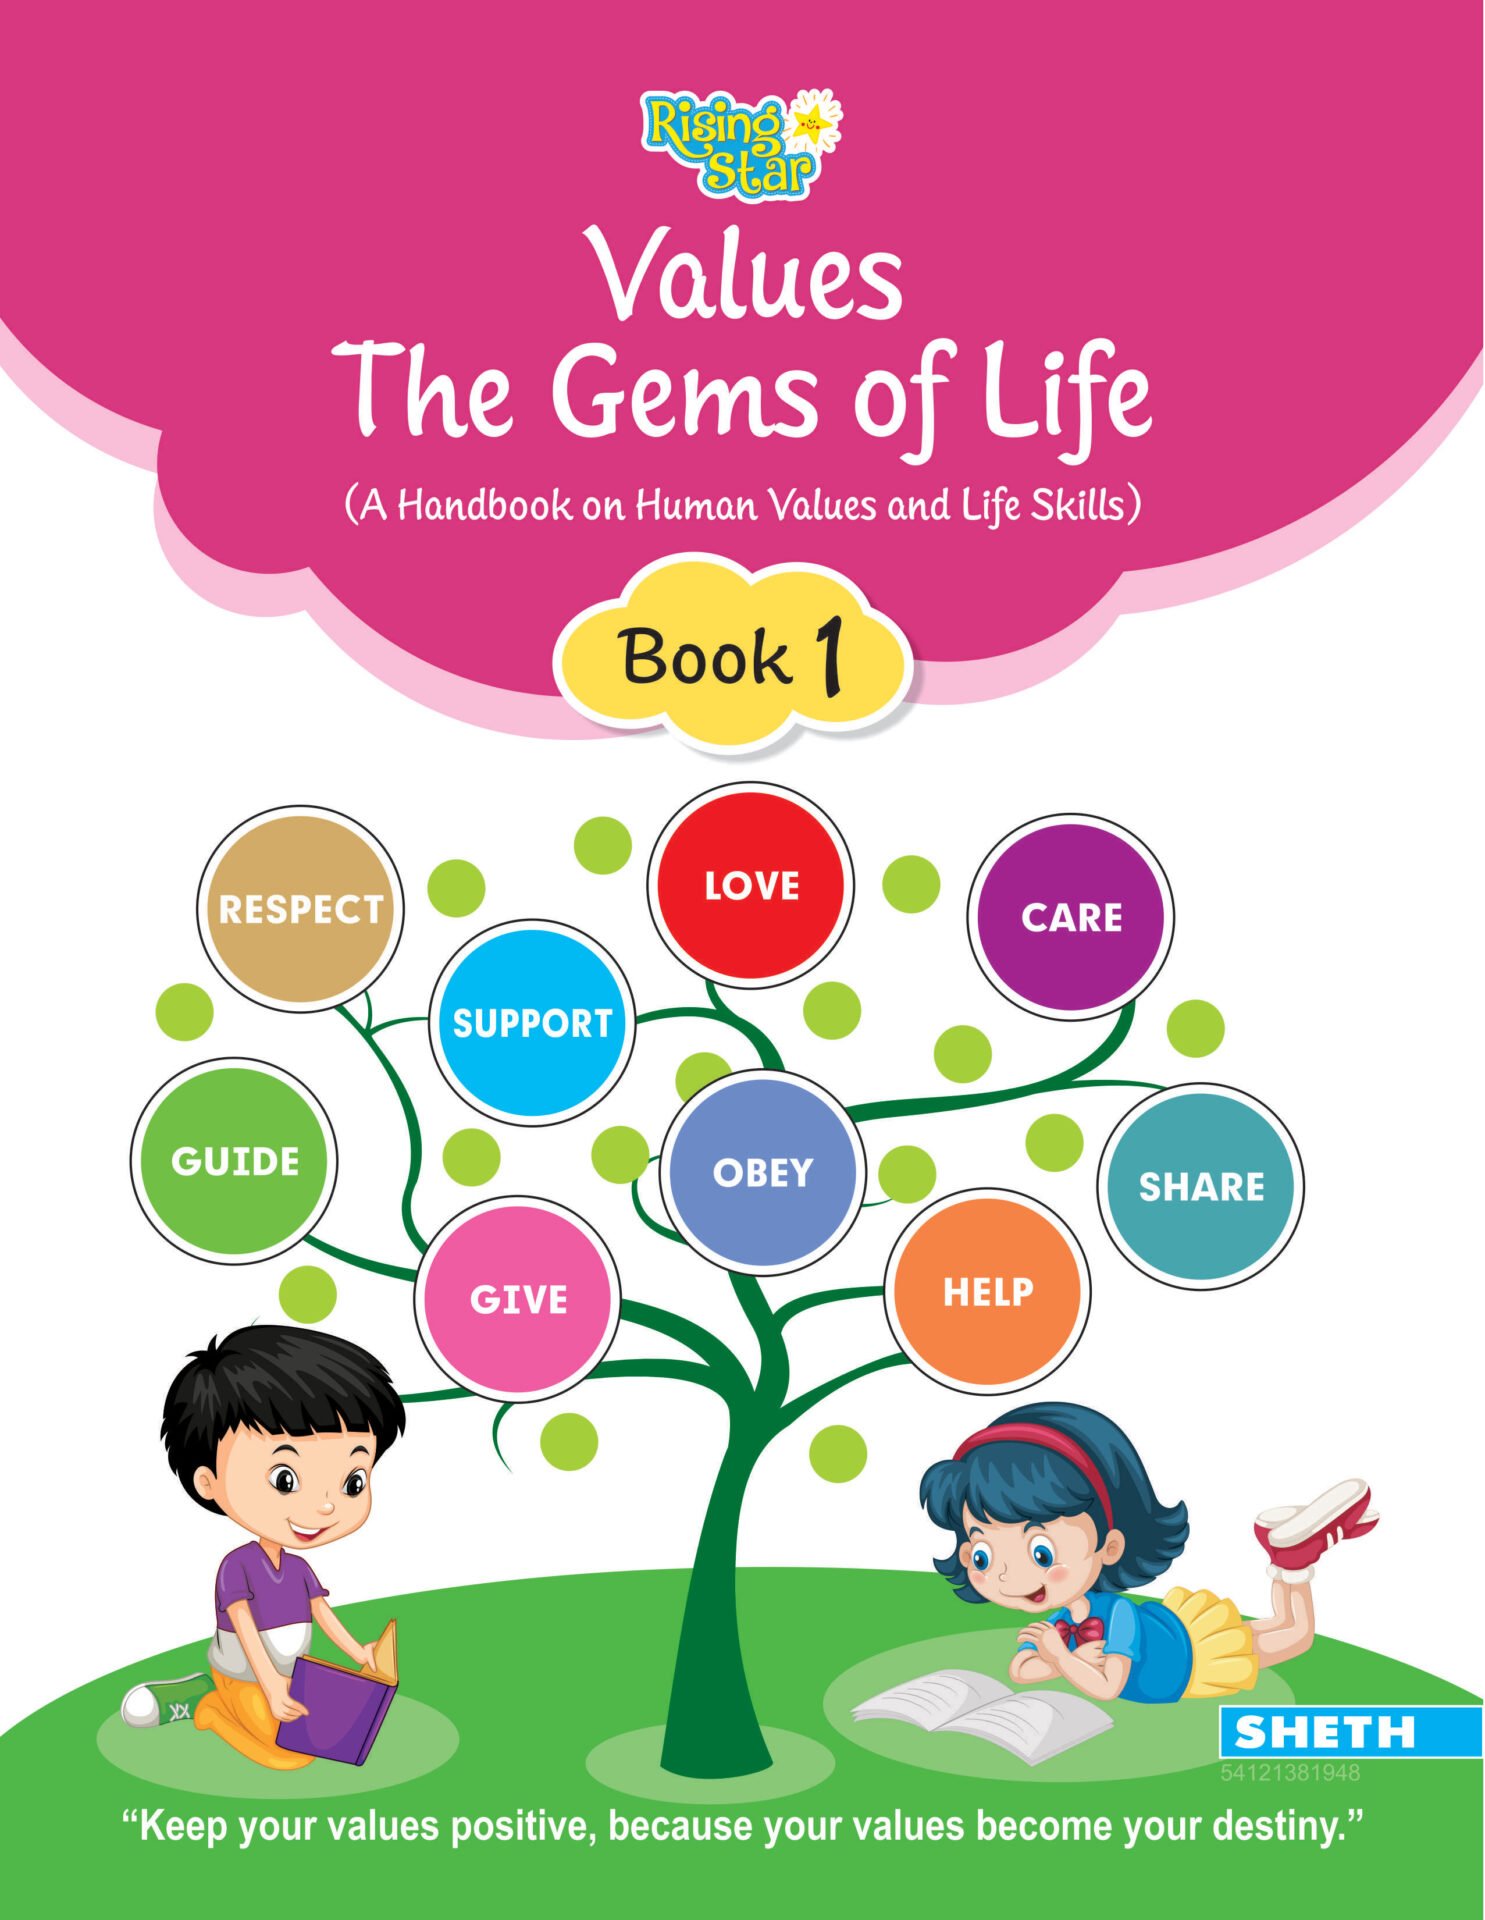 Rising Star Values The Gems of Life Book 1 2